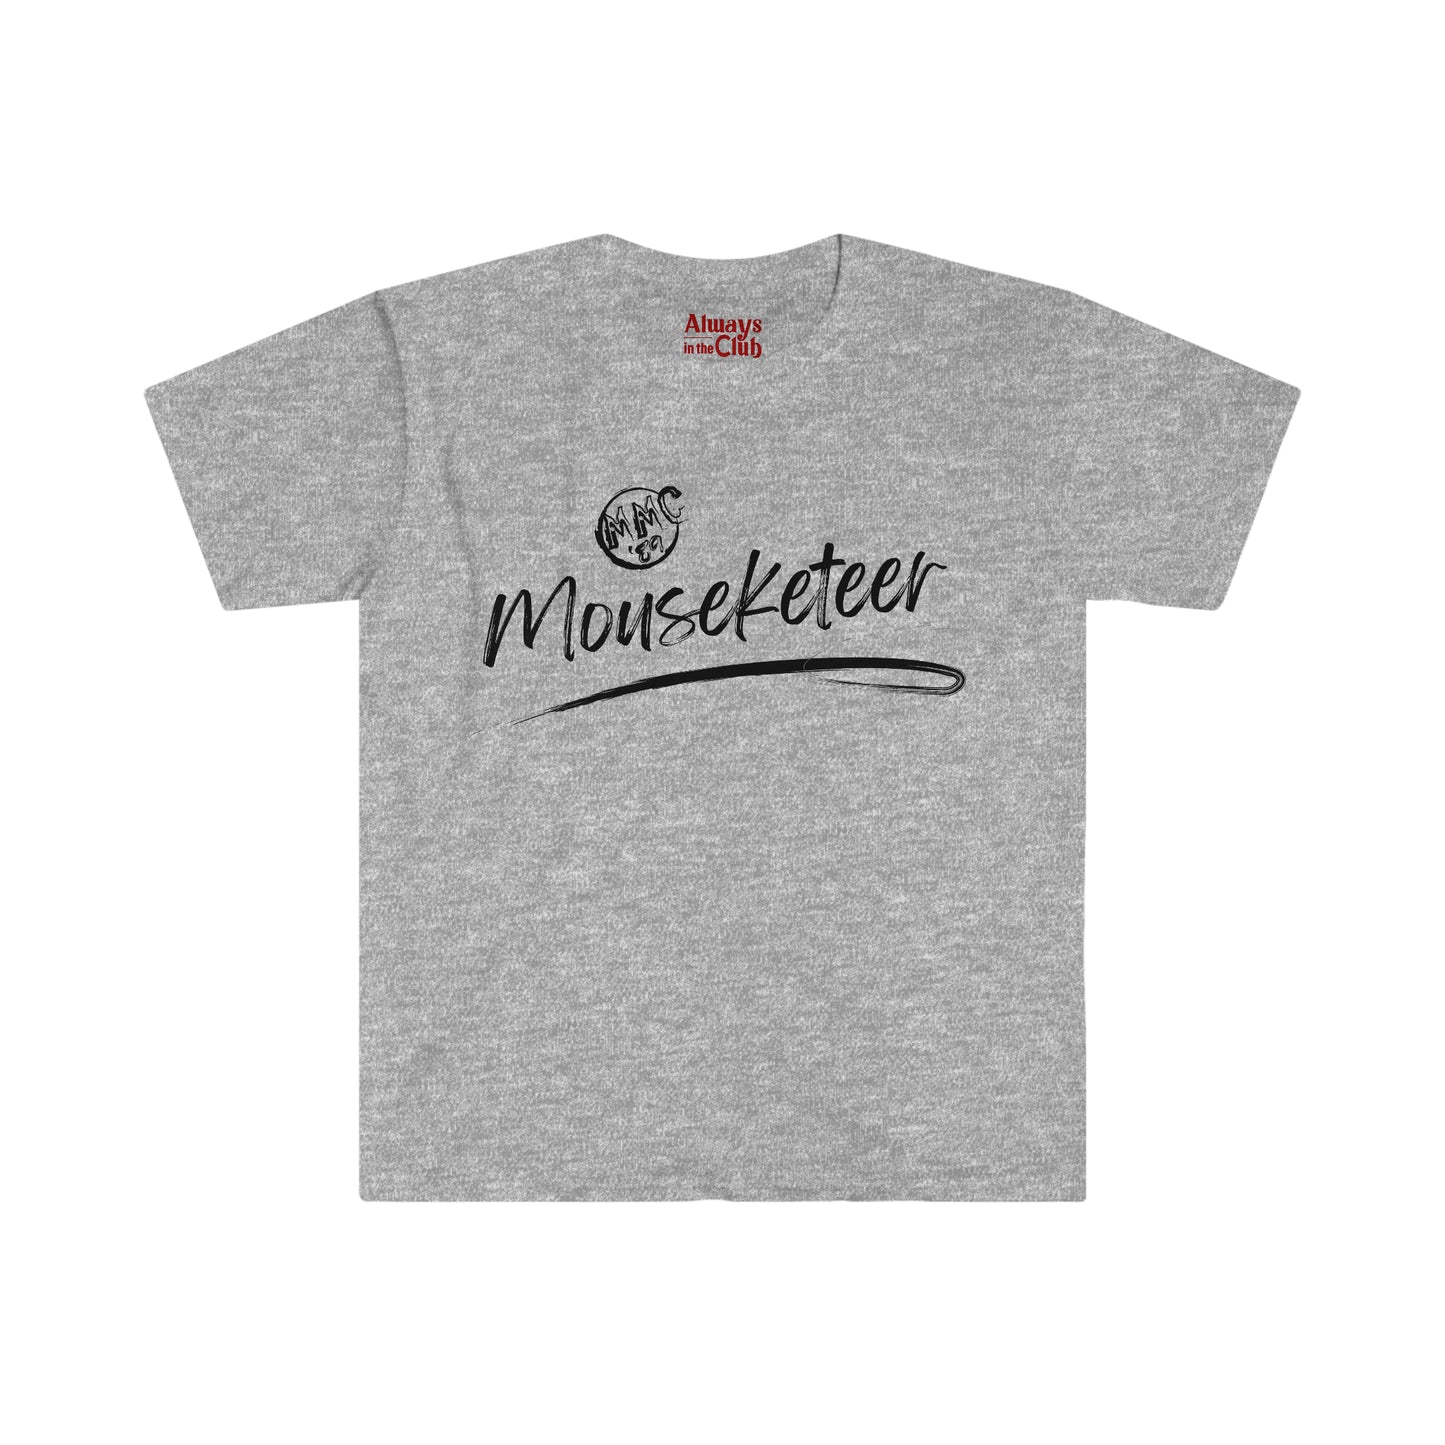 *CLUB MEMBER EXCLUSIVE - MMC'89 Mouseketeer Unisex Softstyle T-Shirt